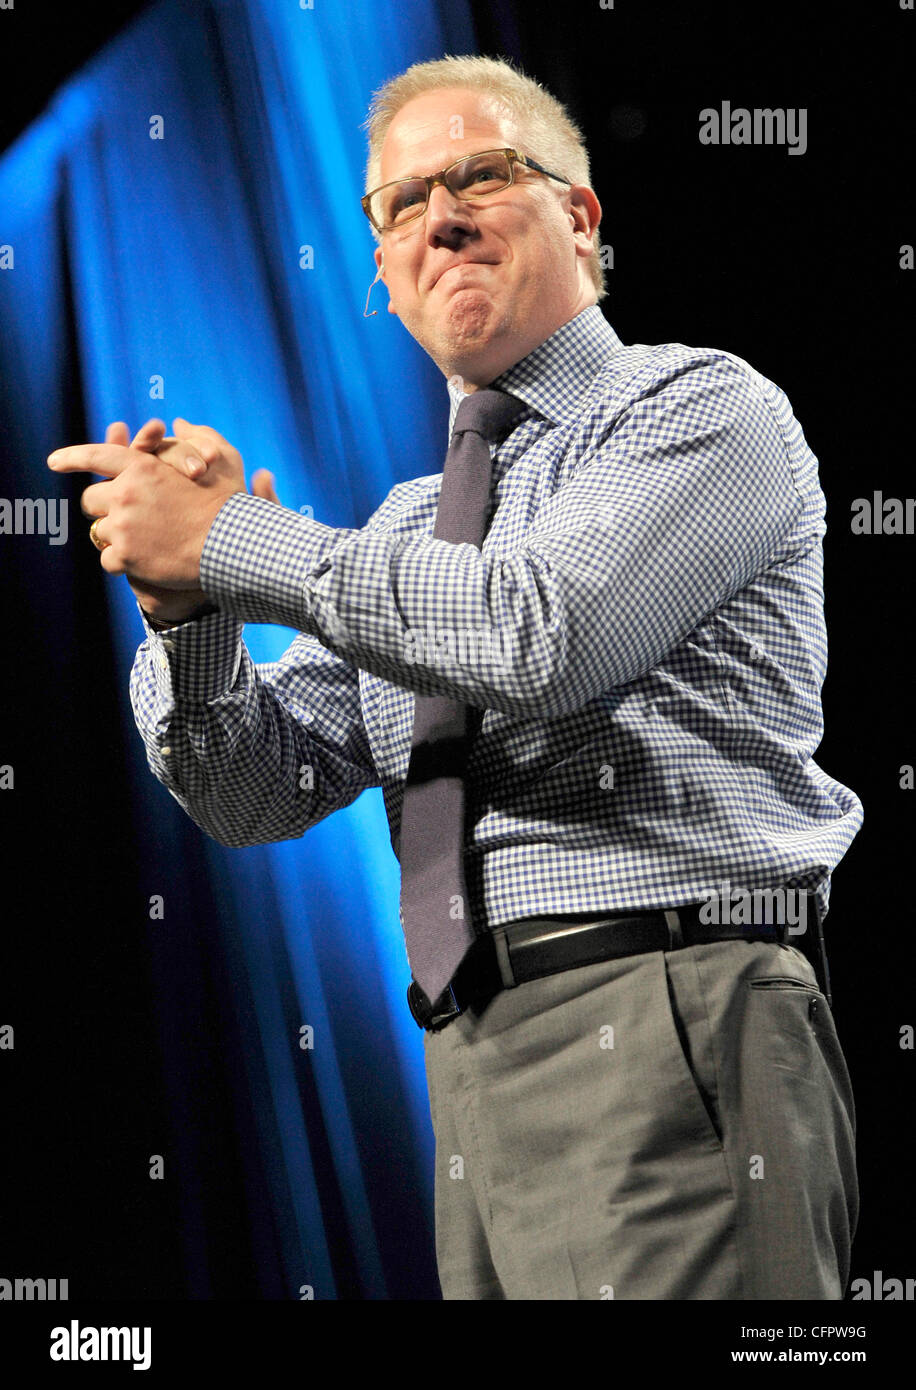 Glenn Beck Political commentator at the Sears Center for RightNation 2010, a unique Midwest political event bringing conservatives, Republicans, libertarians and Tea Party independents together in Obama’s backyard just six weeks before the November electi Stock Photo